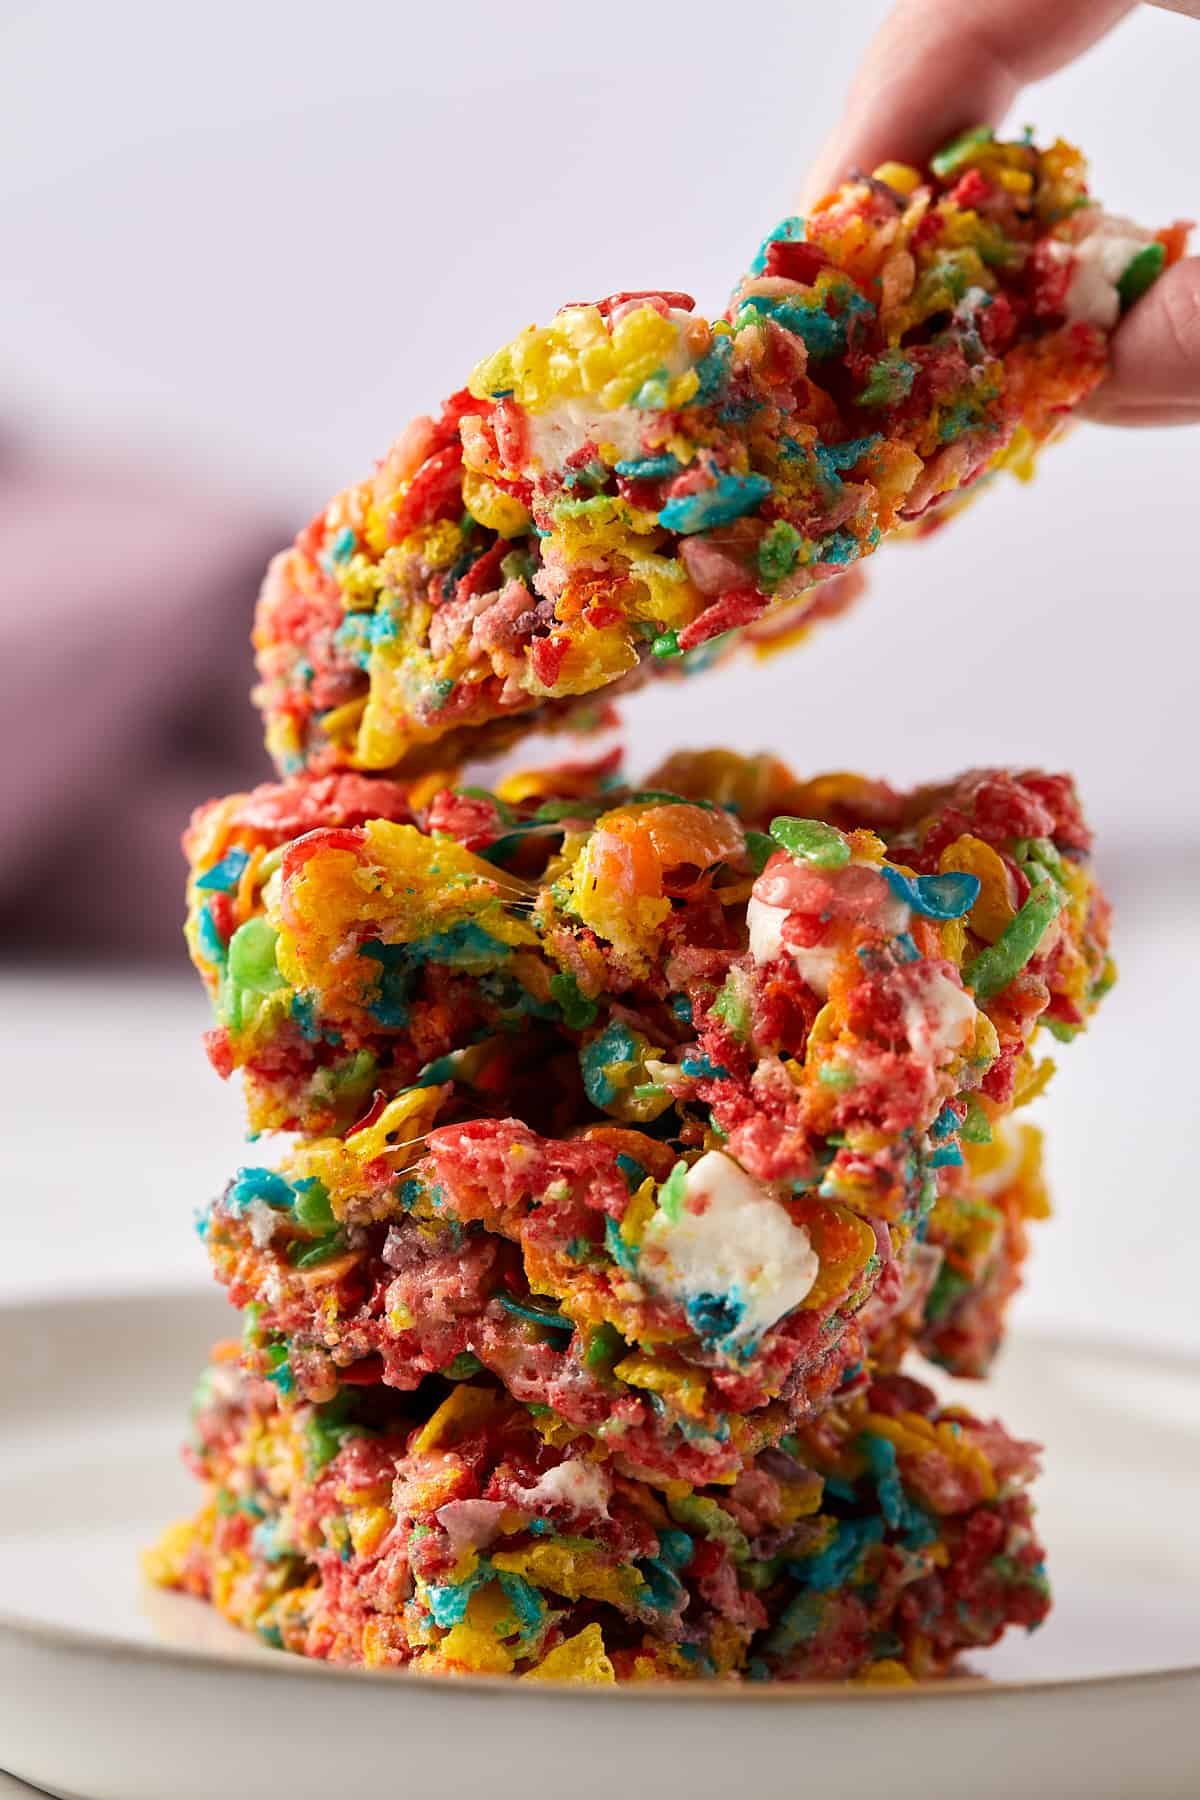 Fruity pebbles marshmallow treat stacked on top of each other with a hand grabbing one from the top.